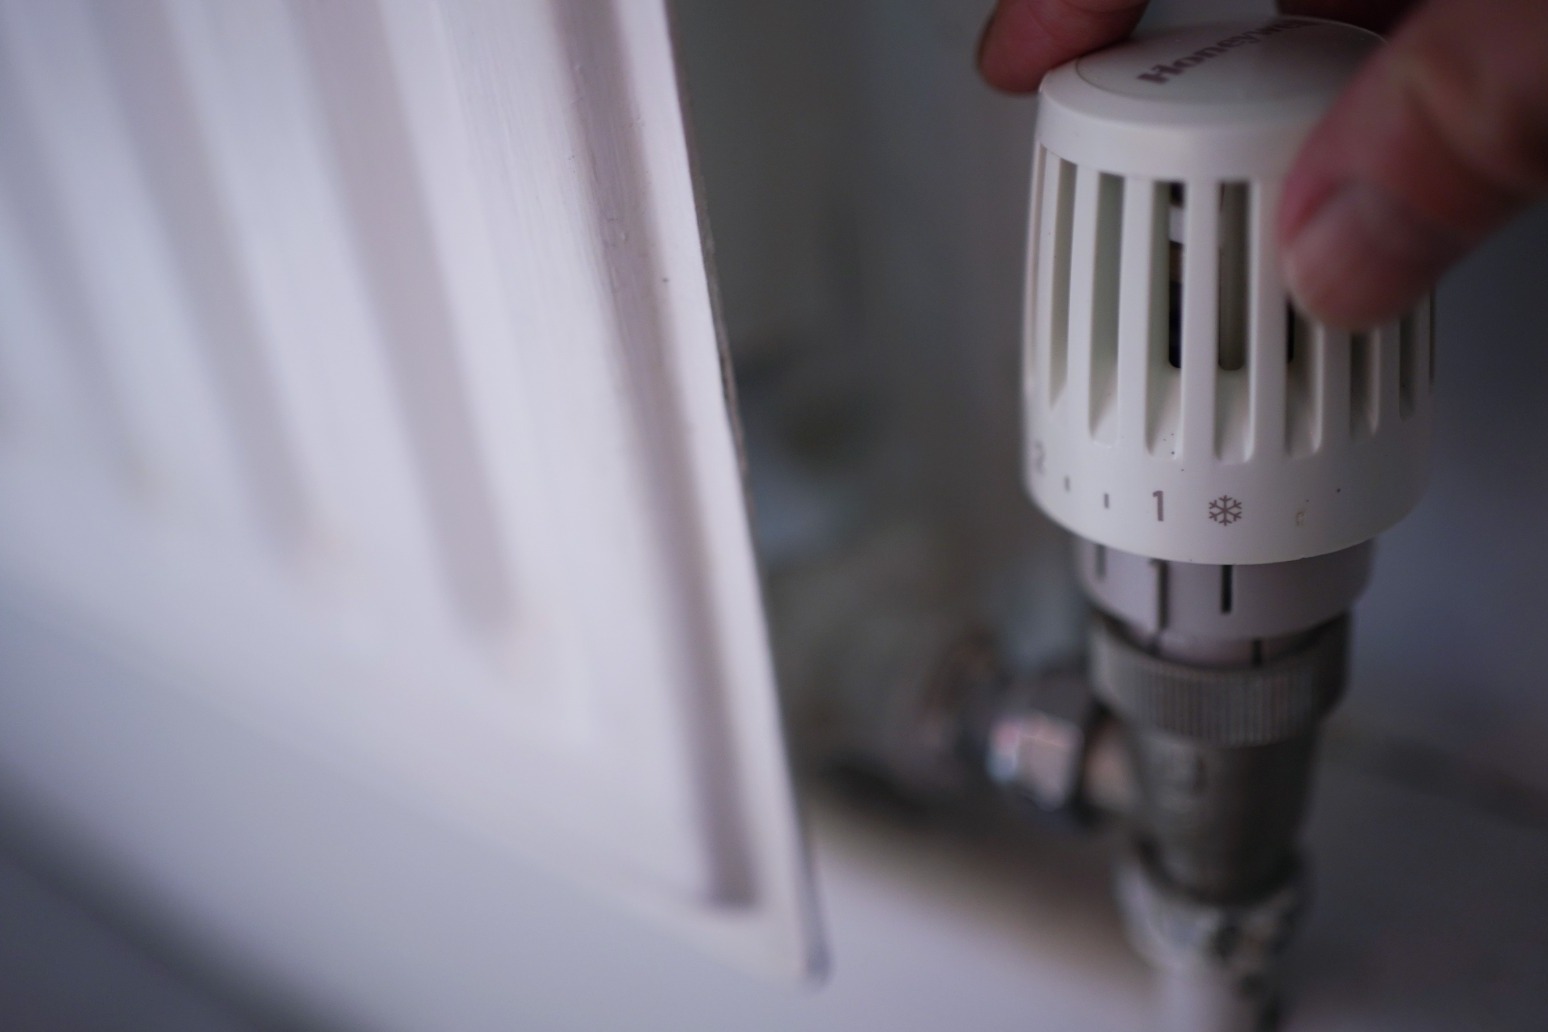 Some households ‘could save over £1,000 annually with efficiency improvements’ 